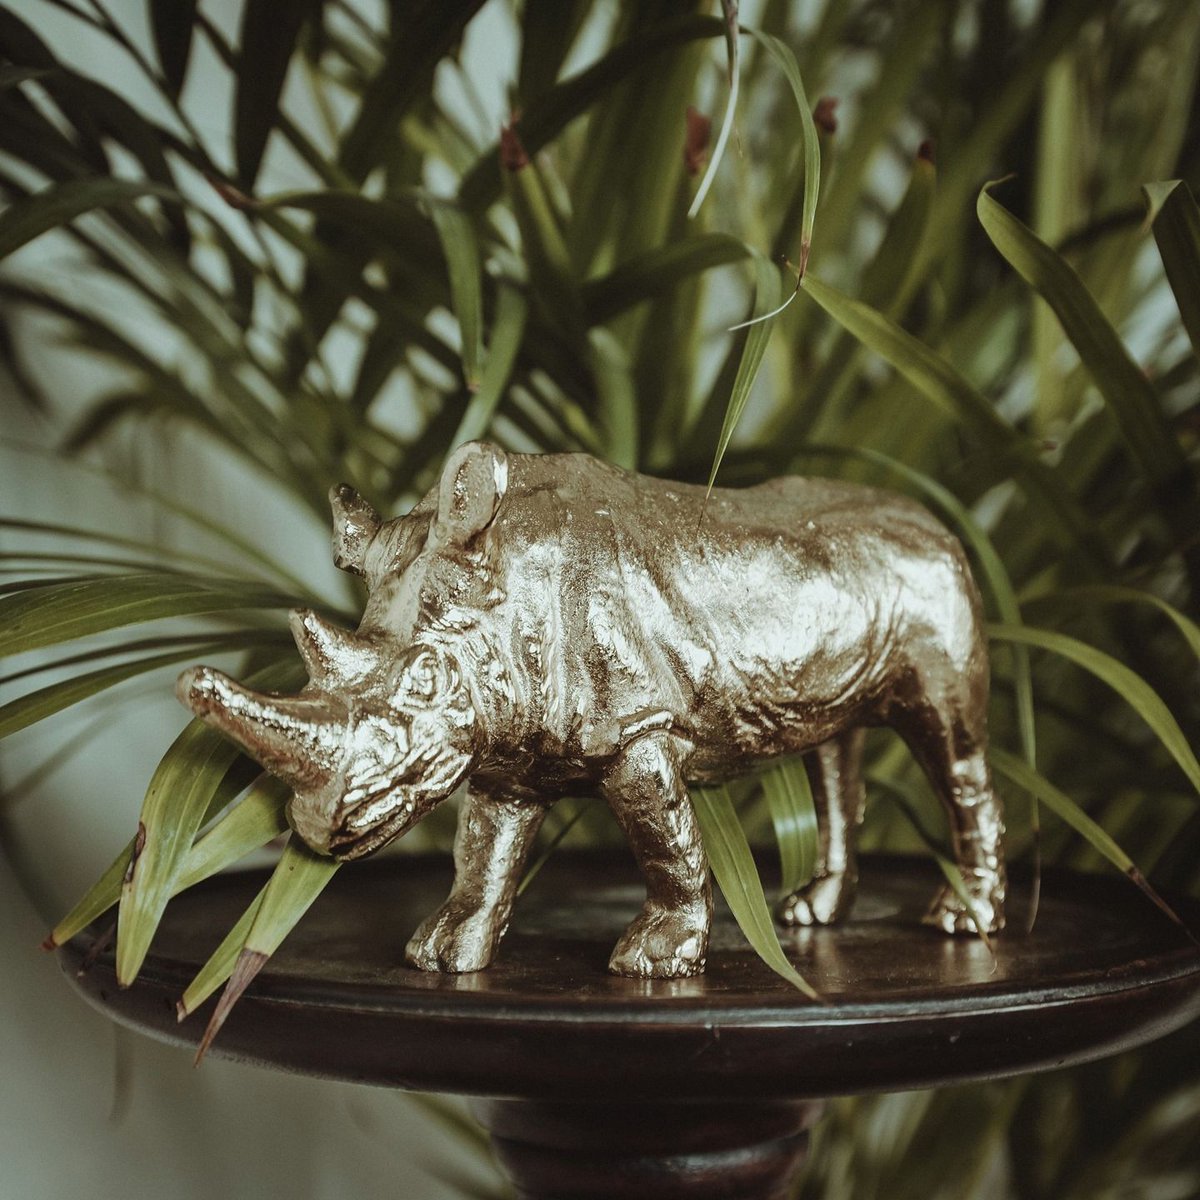 Russel the Rhino looking magnificent! 🦏

#jungleinspo #homedecor #myhousebeautiful  #ltkhome #howyouhome #ggathome #home #productstyle #currenthomeview #deco #bohodecor #apartmenttherapy #jungalowstyle #livingroomdecoration #makingmyhaven #homedeco #interiorphotography